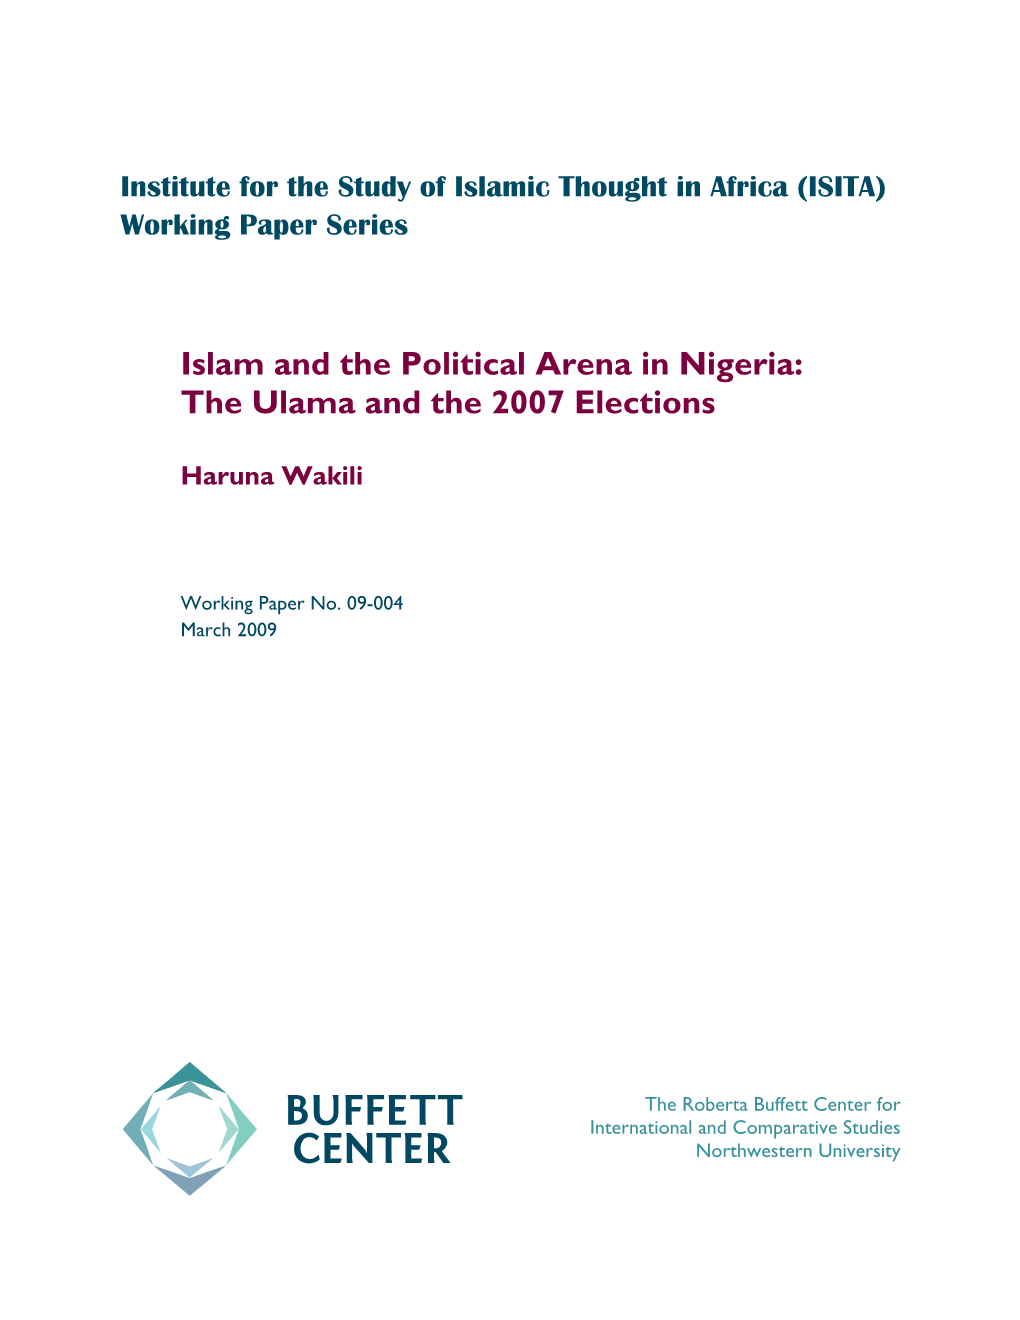 Islam and the Political Arena in Nigeria: the Ulama and the 2007 Elections